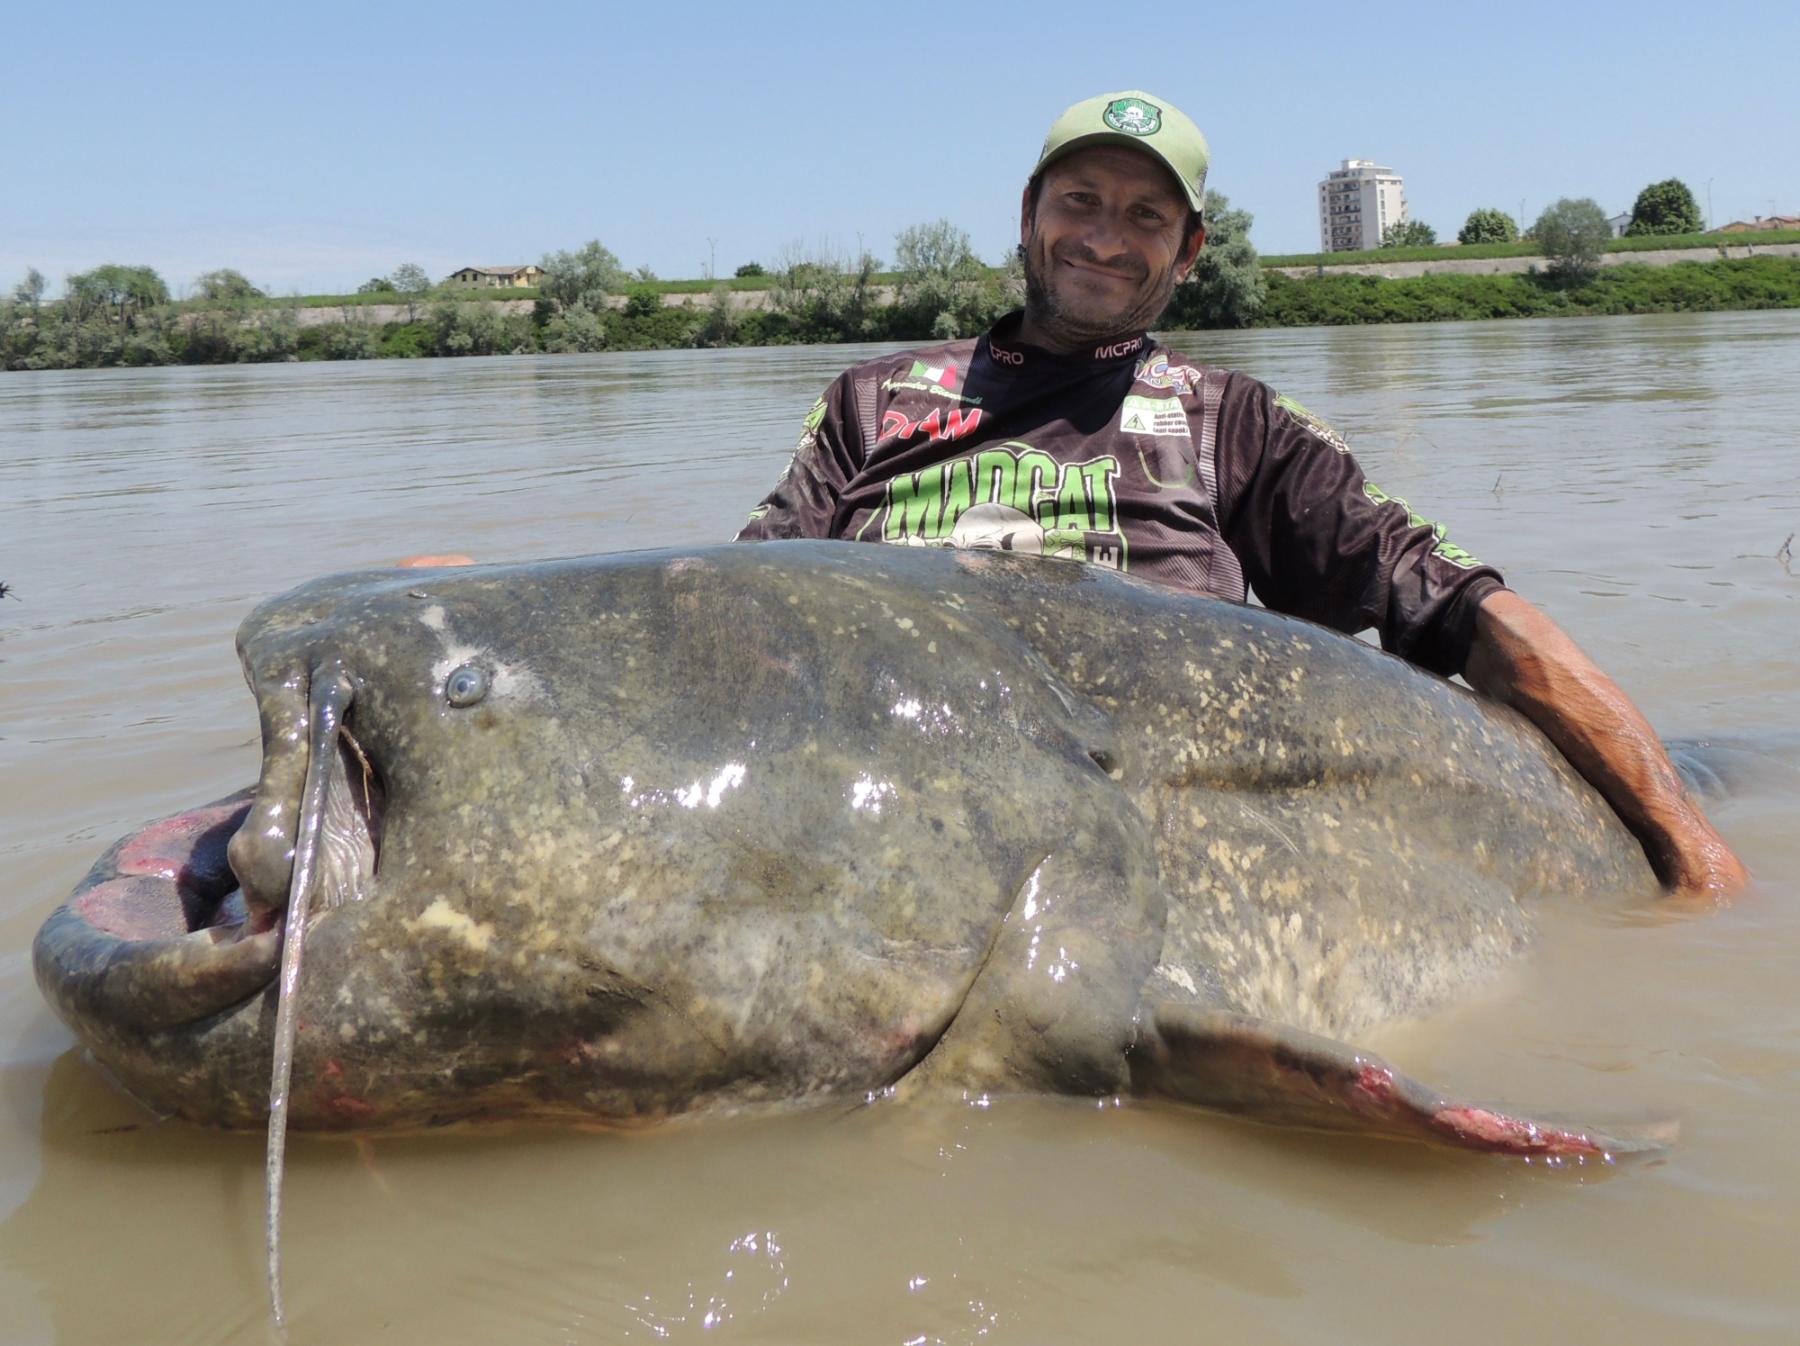 Monster Record Breaking Wels Catfish caught in Italy